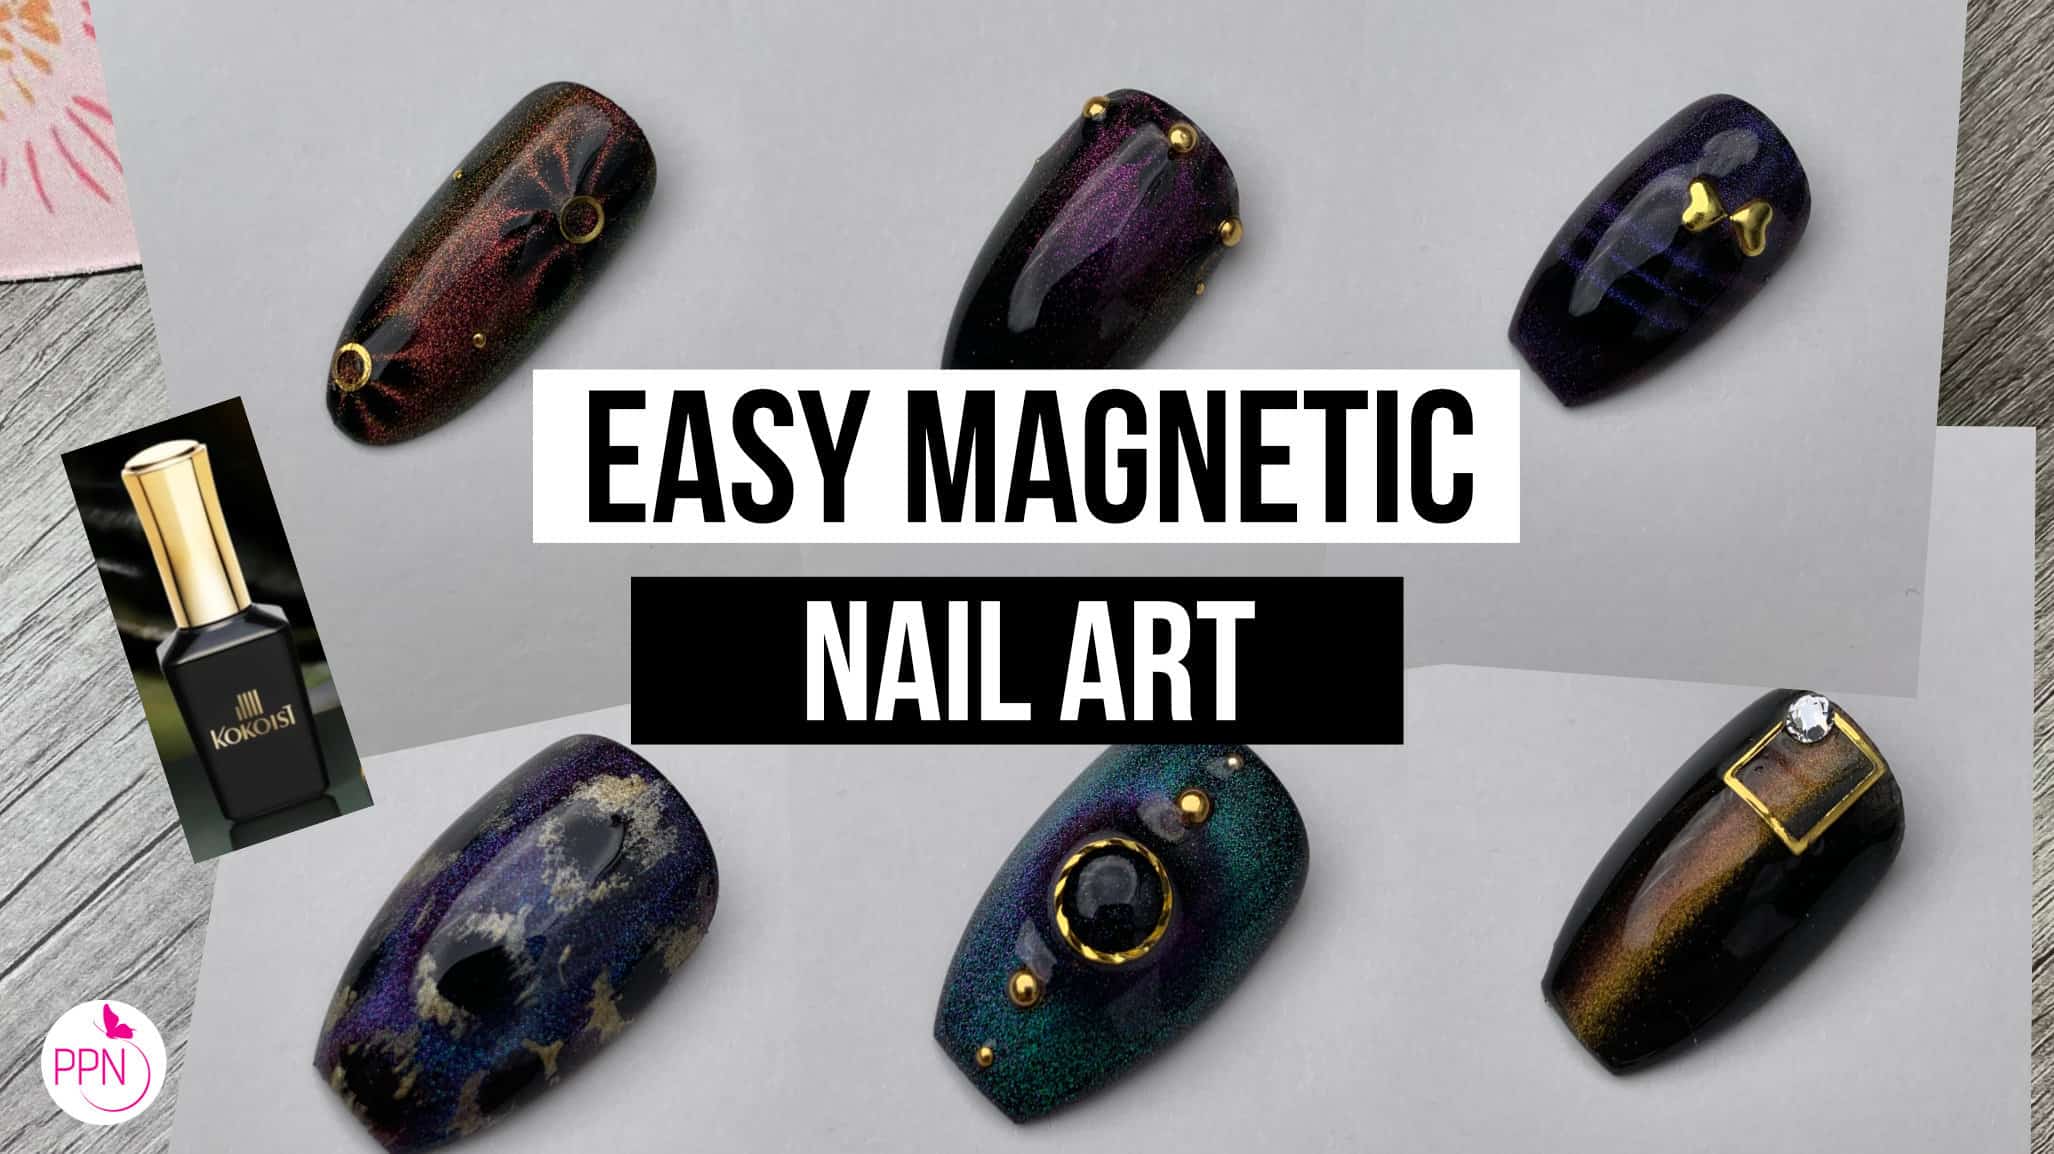 4. Magnetic Nail Art Designs - wide 2